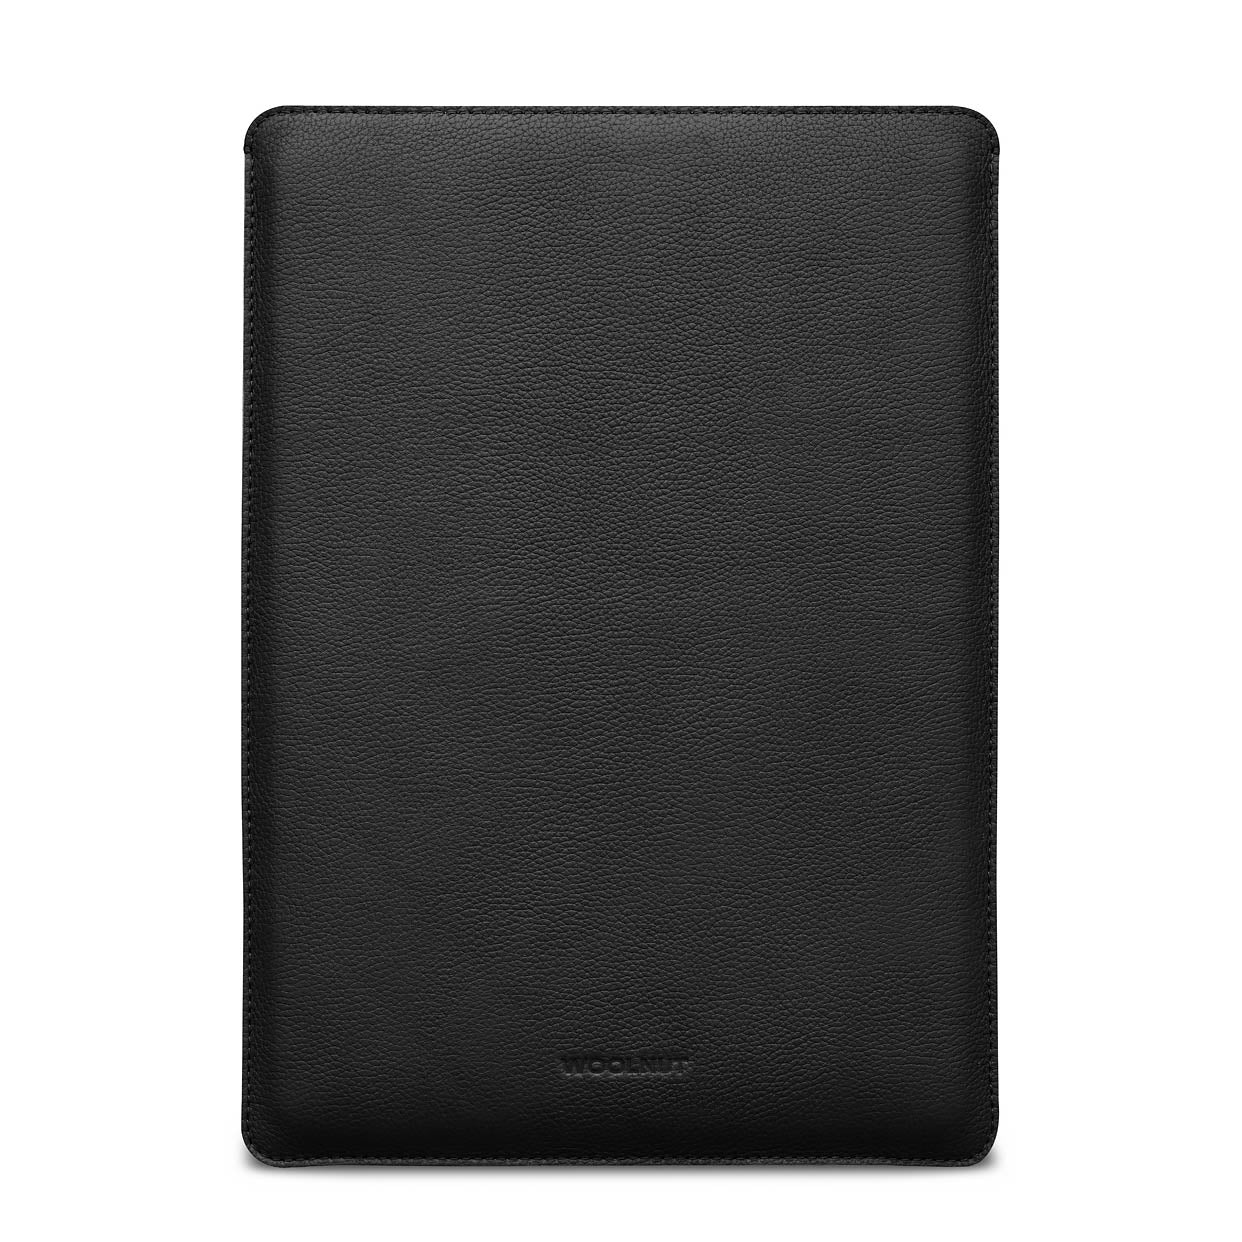 Leather Sleeve for 16-inch MacBook Pro | Shop now – WOOLNUT